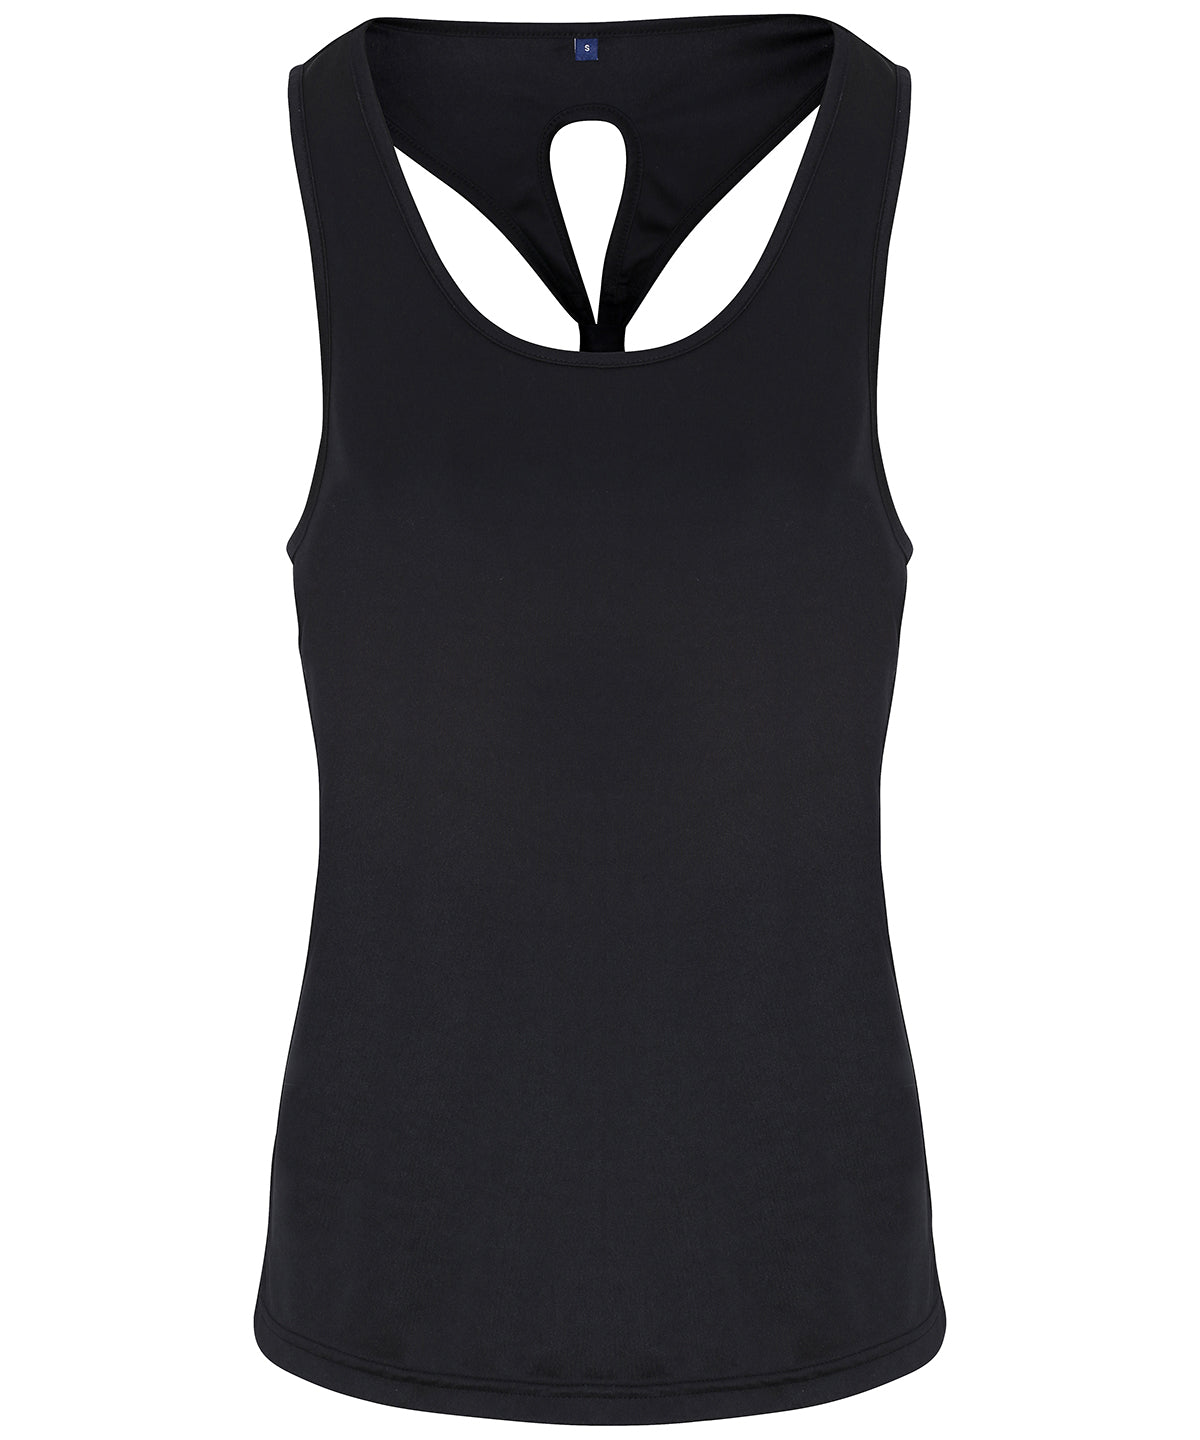 Black - Women's TriDri® yoga knot vest Vests TriDri® Activewear & Performance, Back to the Gym, Exclusives, Rebrandable, Sports & Leisure, T-Shirts & Vests, UPF Protection Schoolwear Centres